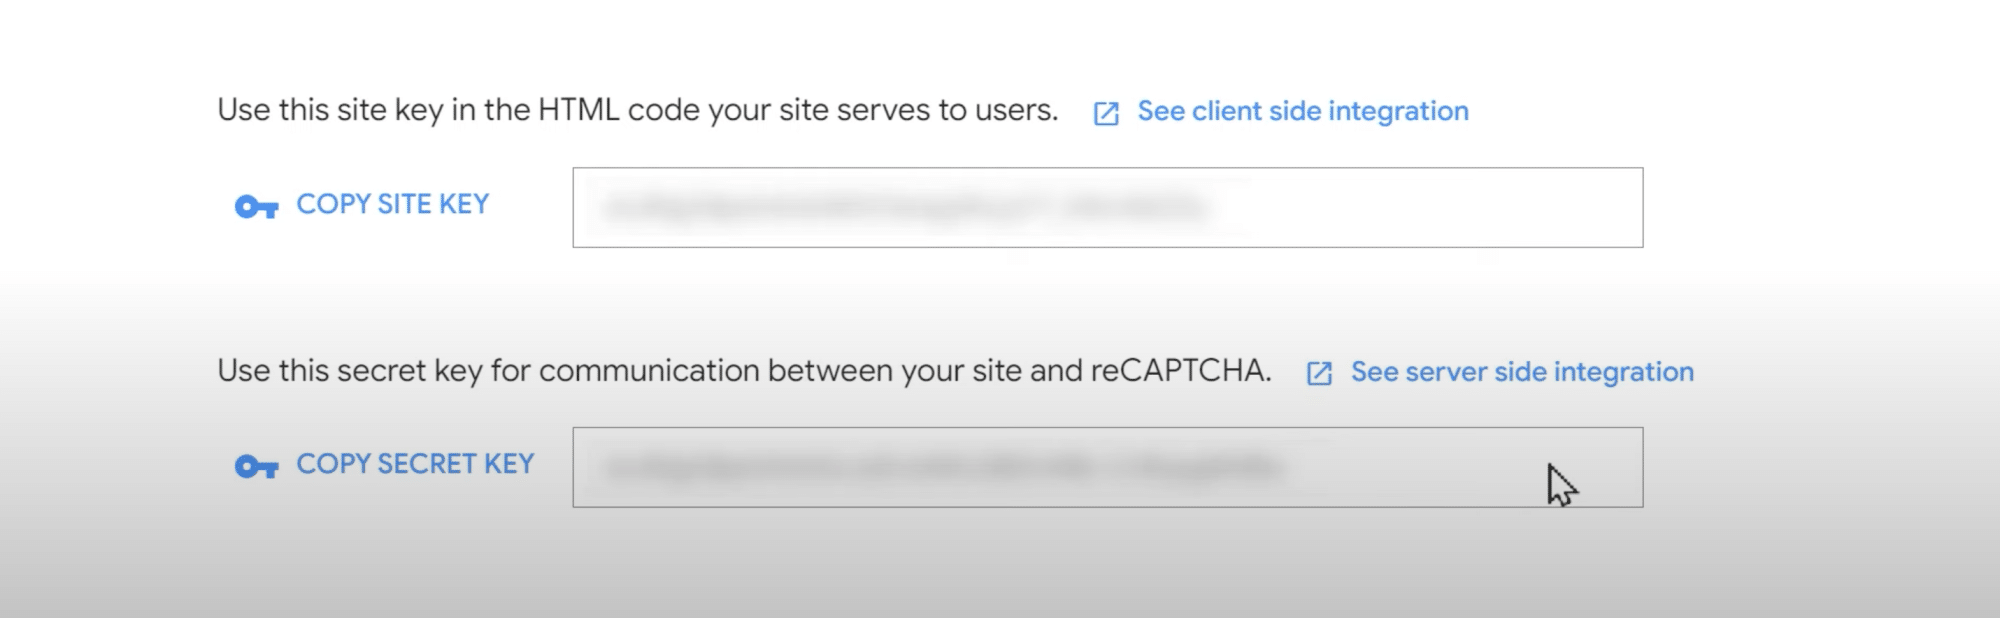 Get your google recaptcha keys how to add recaptcha in login form using elementor [step by step] from the plus addons for elementor